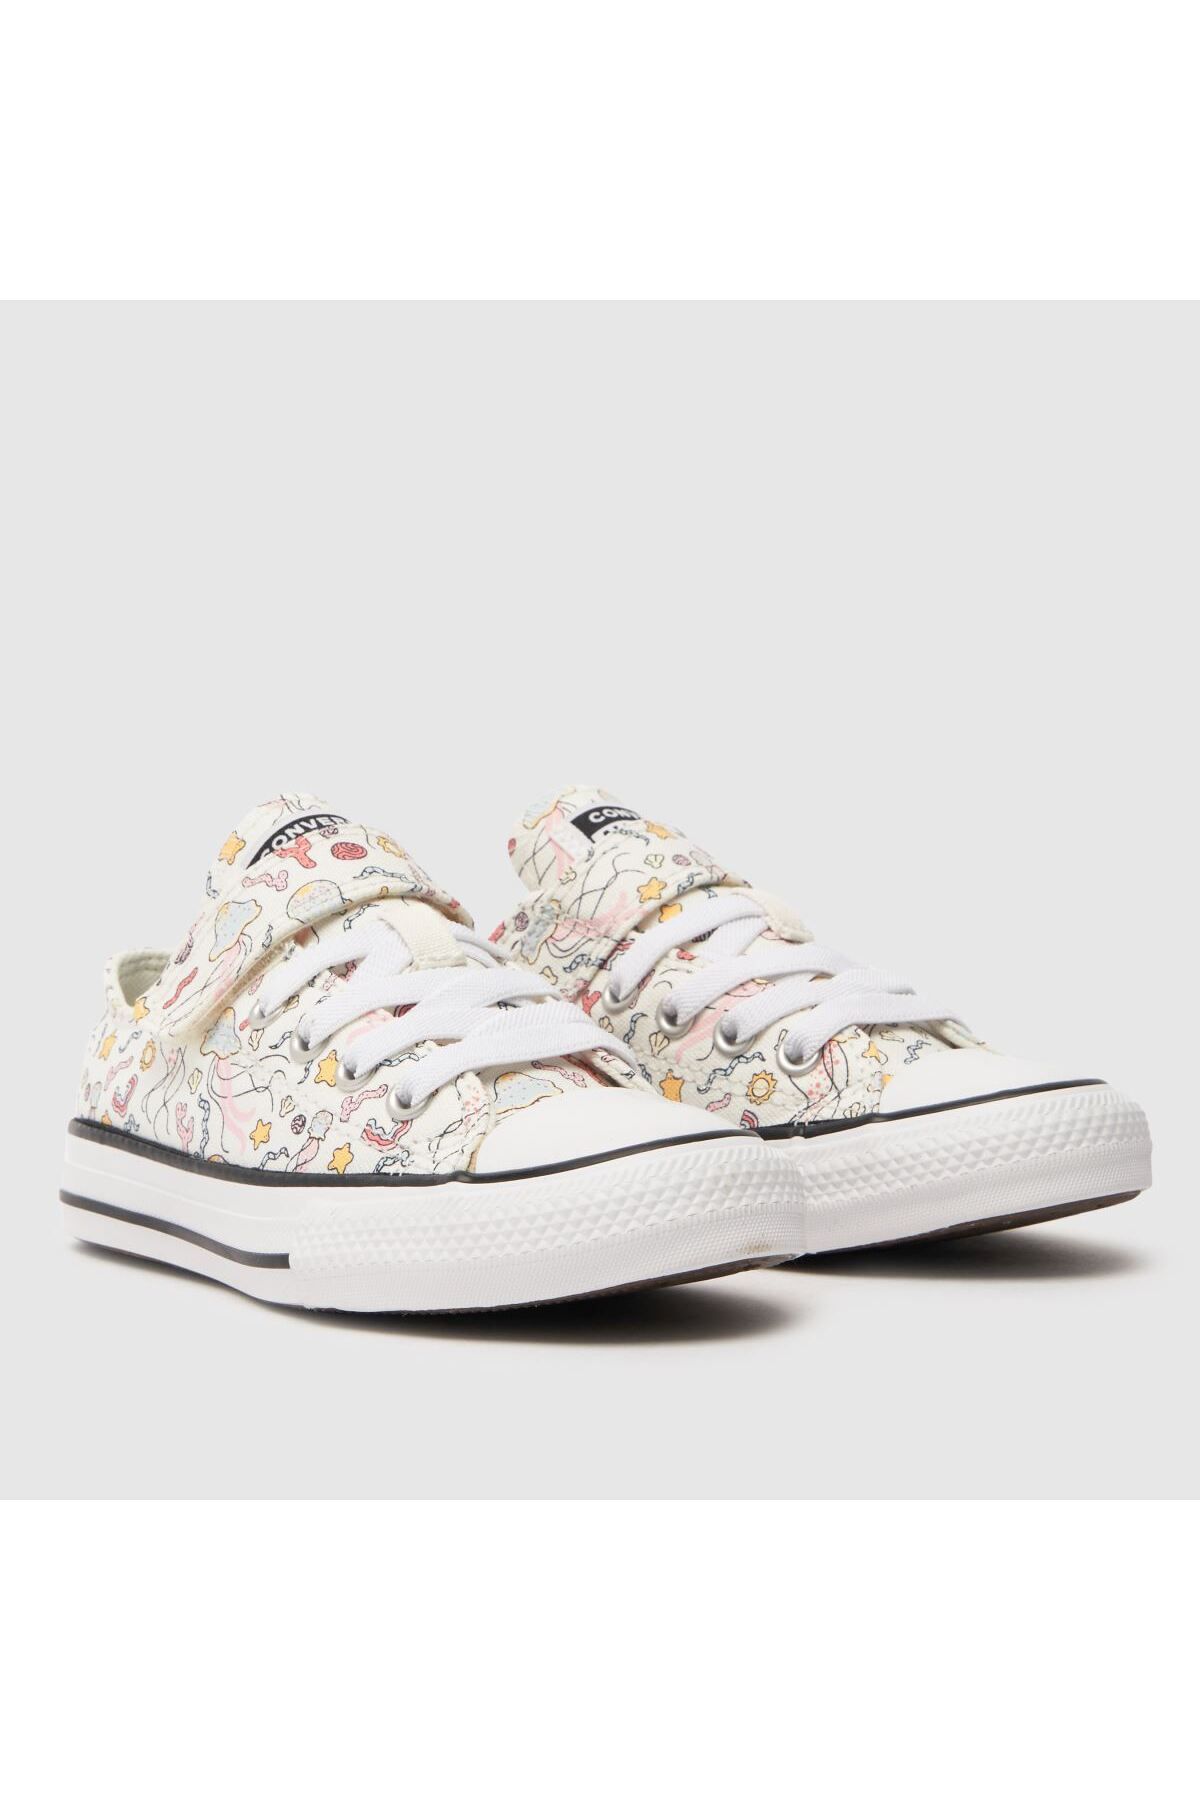 Converse Chuck Taylor All Star 1V Easy-On Majestic Mermaids